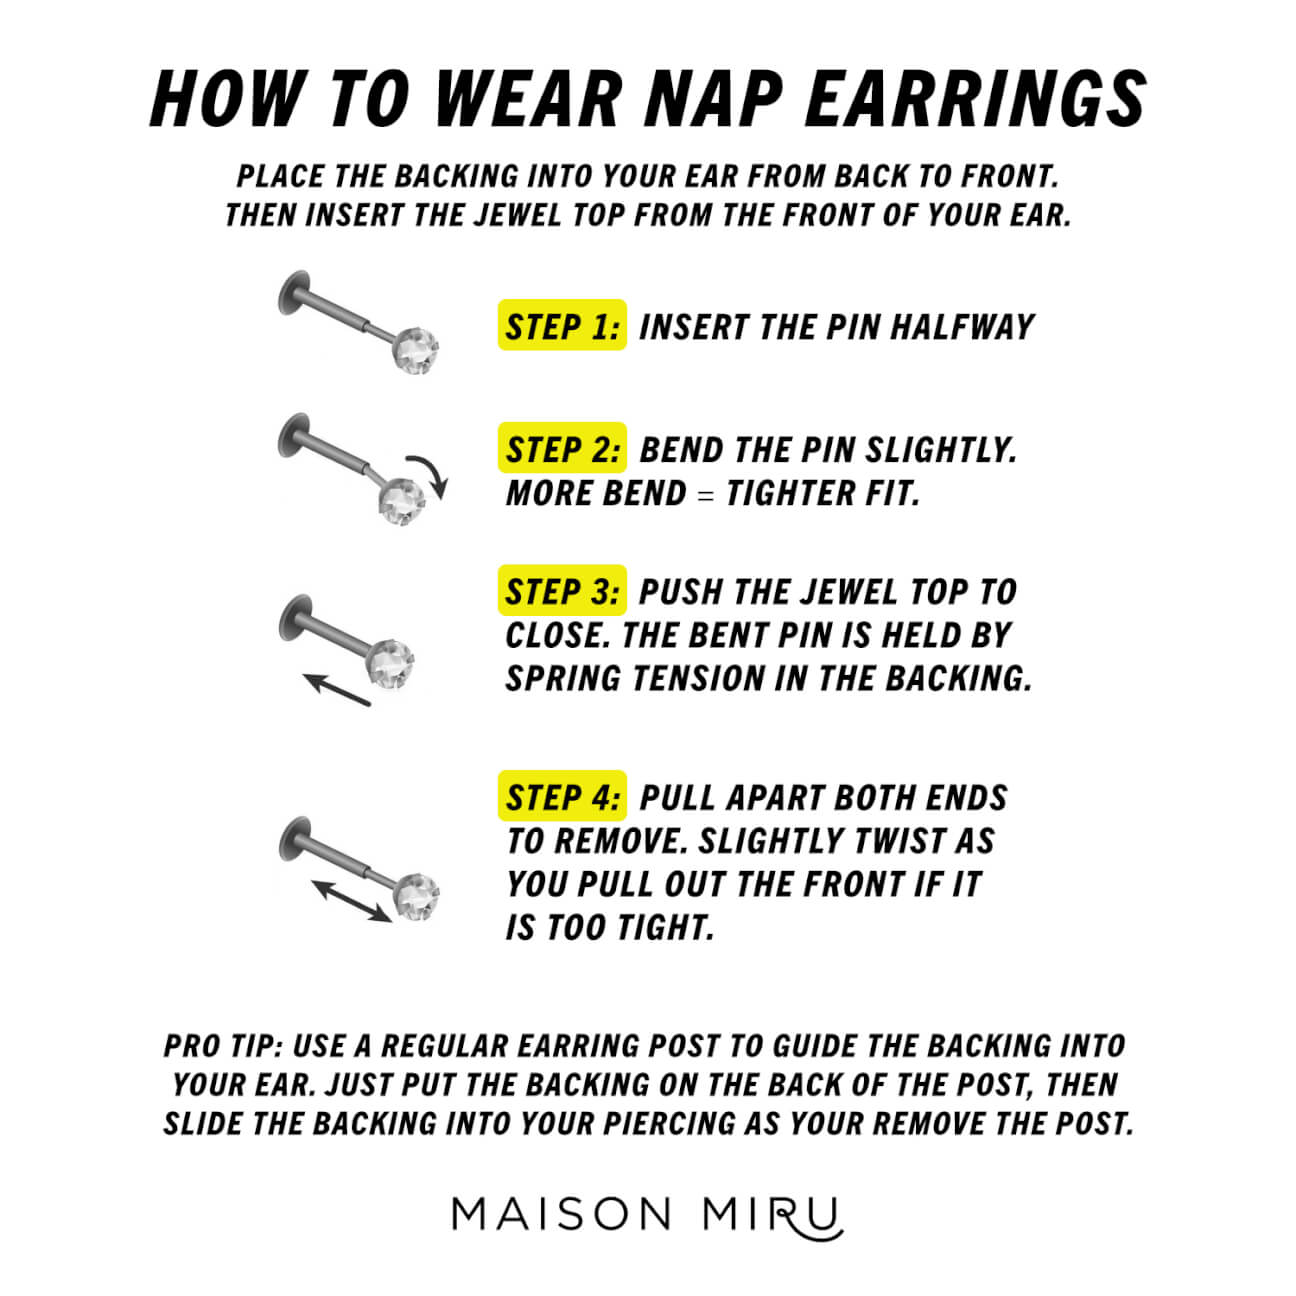 How to Wear the Pave Lightning Nap Earrings